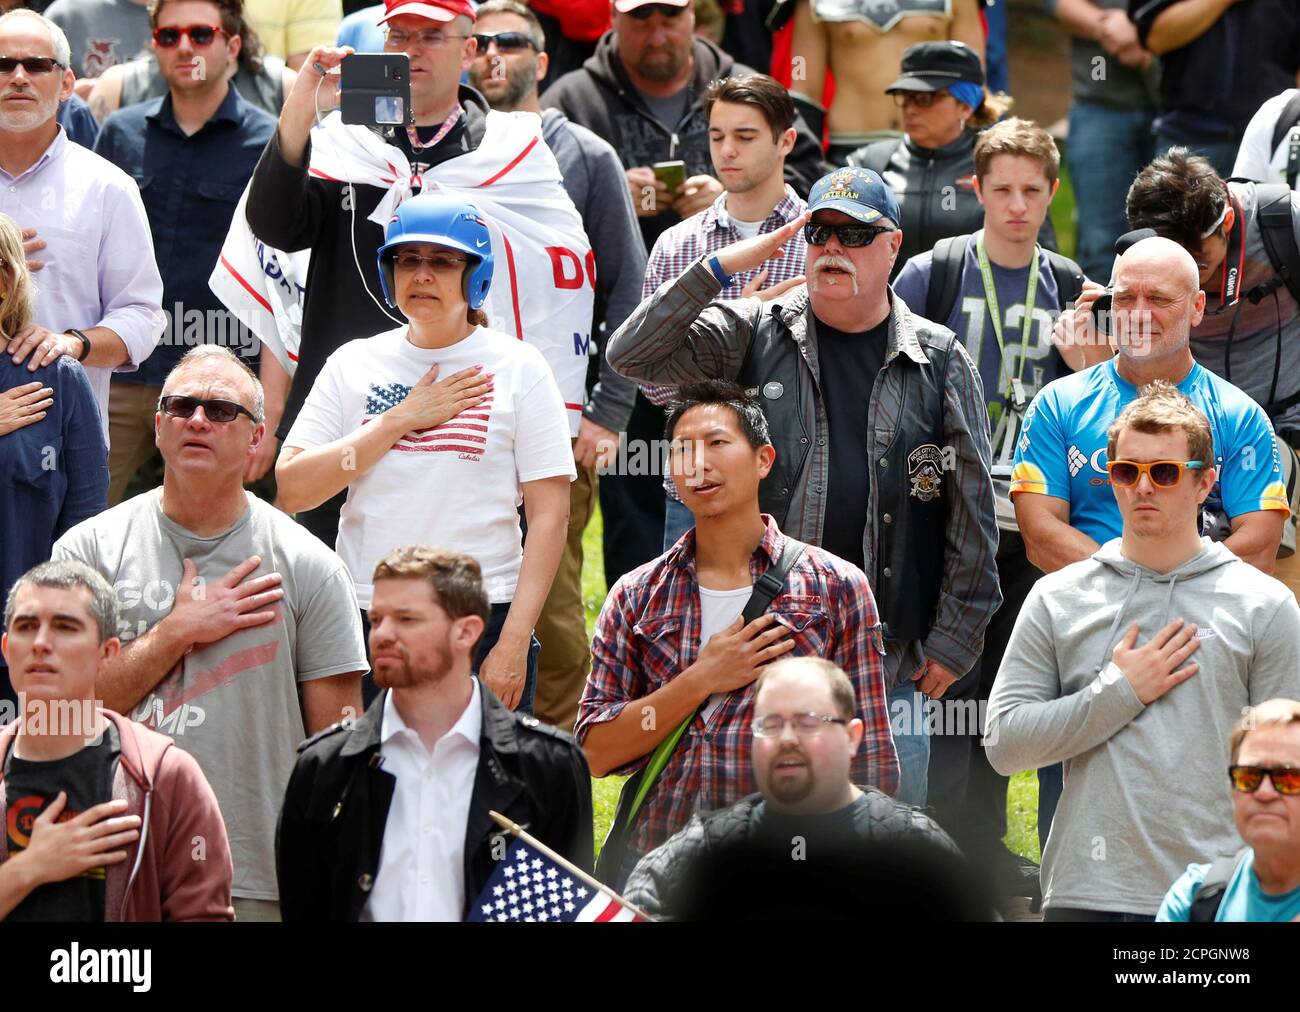 Conservative protesters recite the National Anthem during competing demonstrations in Portland, Oregon, U.S. June 4, 2017.  REUTERS/Jim Urquhart Stock Photo